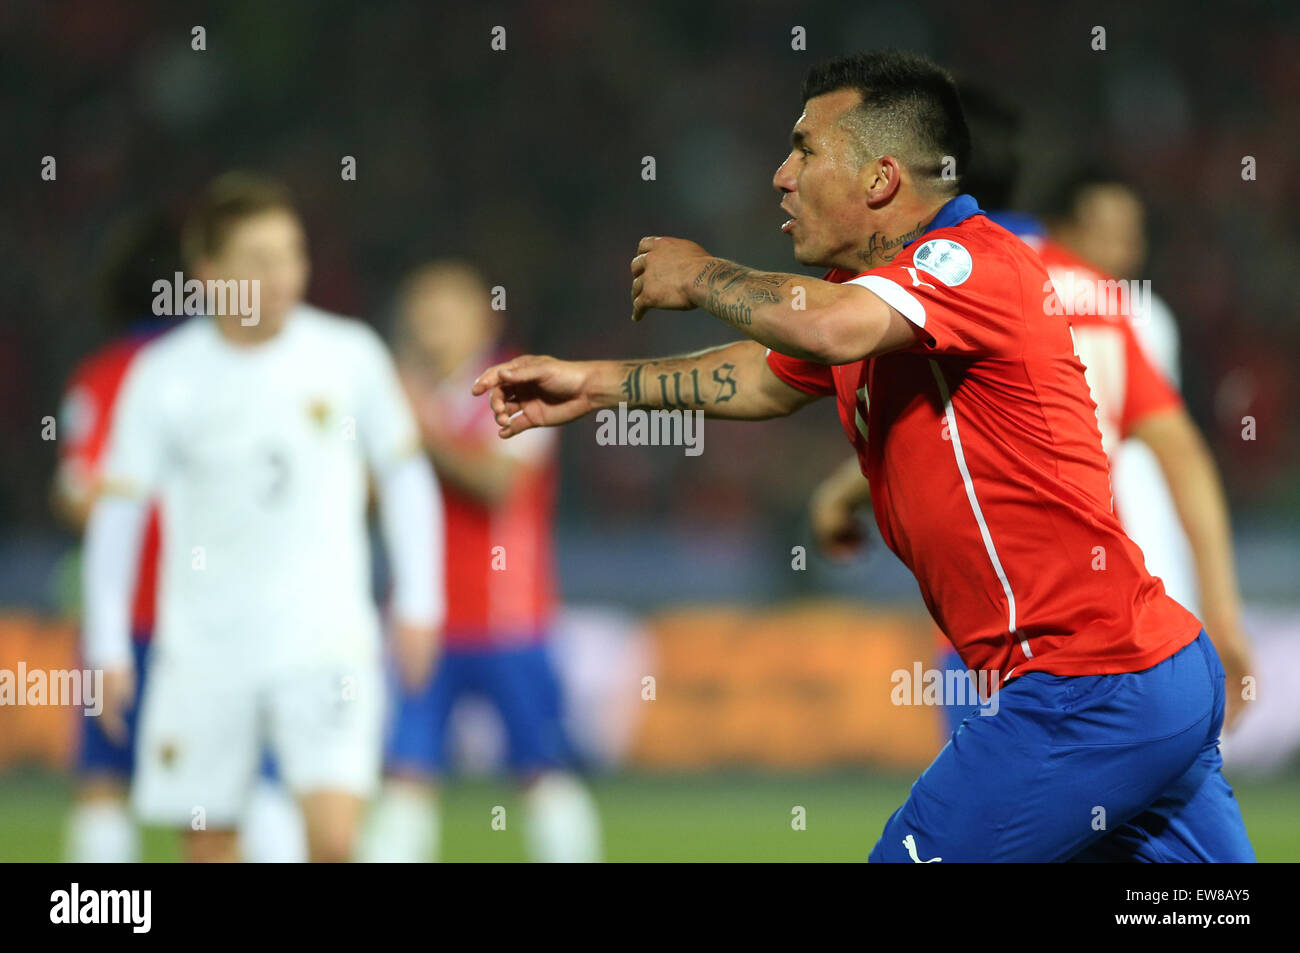 Santiago, Chile. 19th June, 2015. Chile's Gary Medel celebrates his score during the Group A match of the Copa America Chile 2015, against Bolivia, held in the National Stadium, in Santiago, Chile, on June 19, 2015. Chile won 5-0. Credit:  Jorge Villegas/Xinhua/Alamy Live News Stock Photo